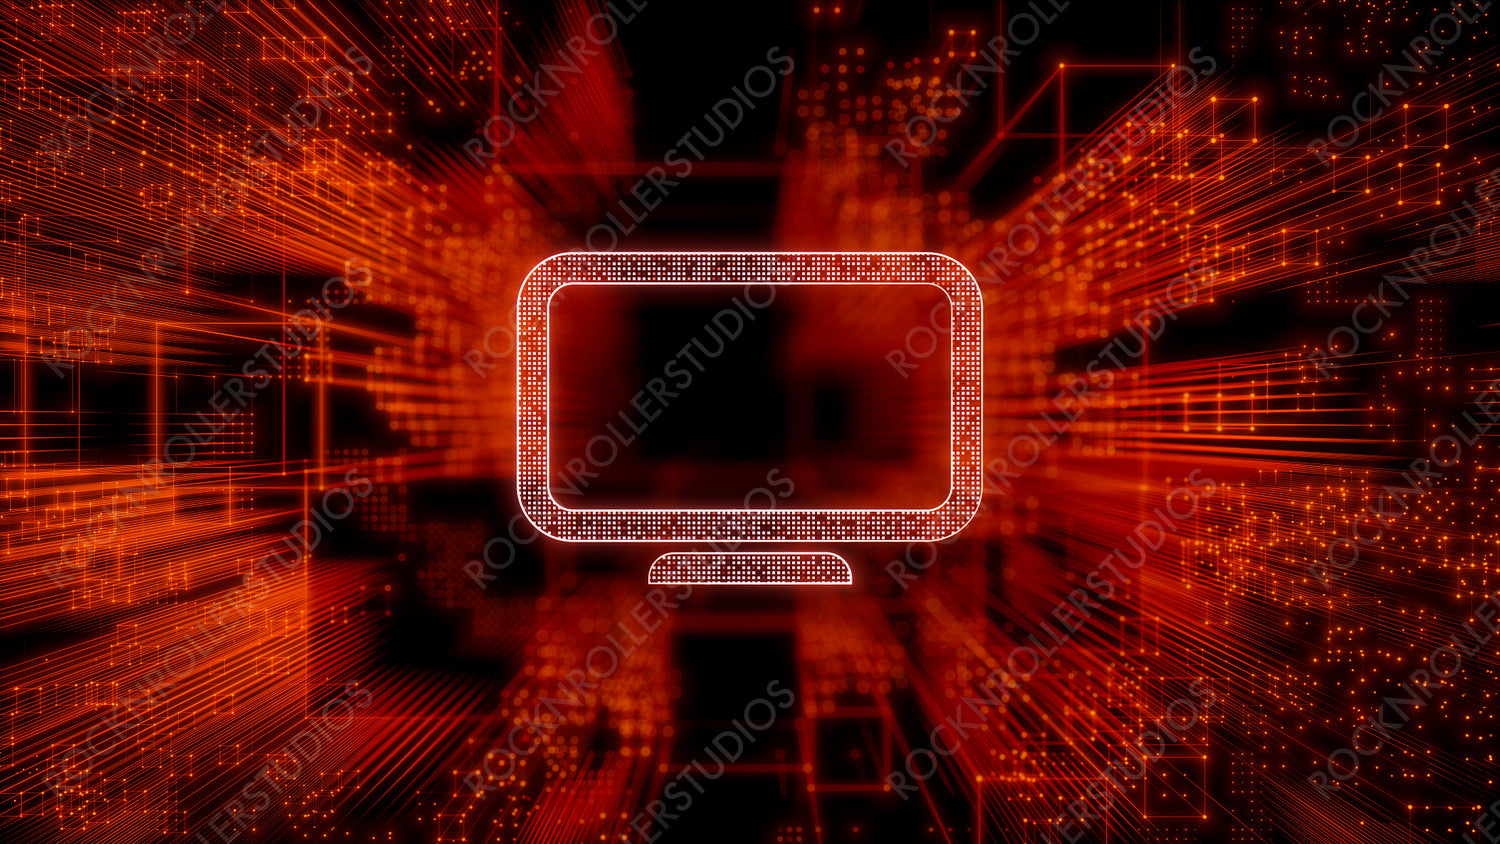 Display Technology Concept with Monitor symbol against a Futuristic, Orange Digital Grid background. Network Tech Wallpaper. 3D Render 